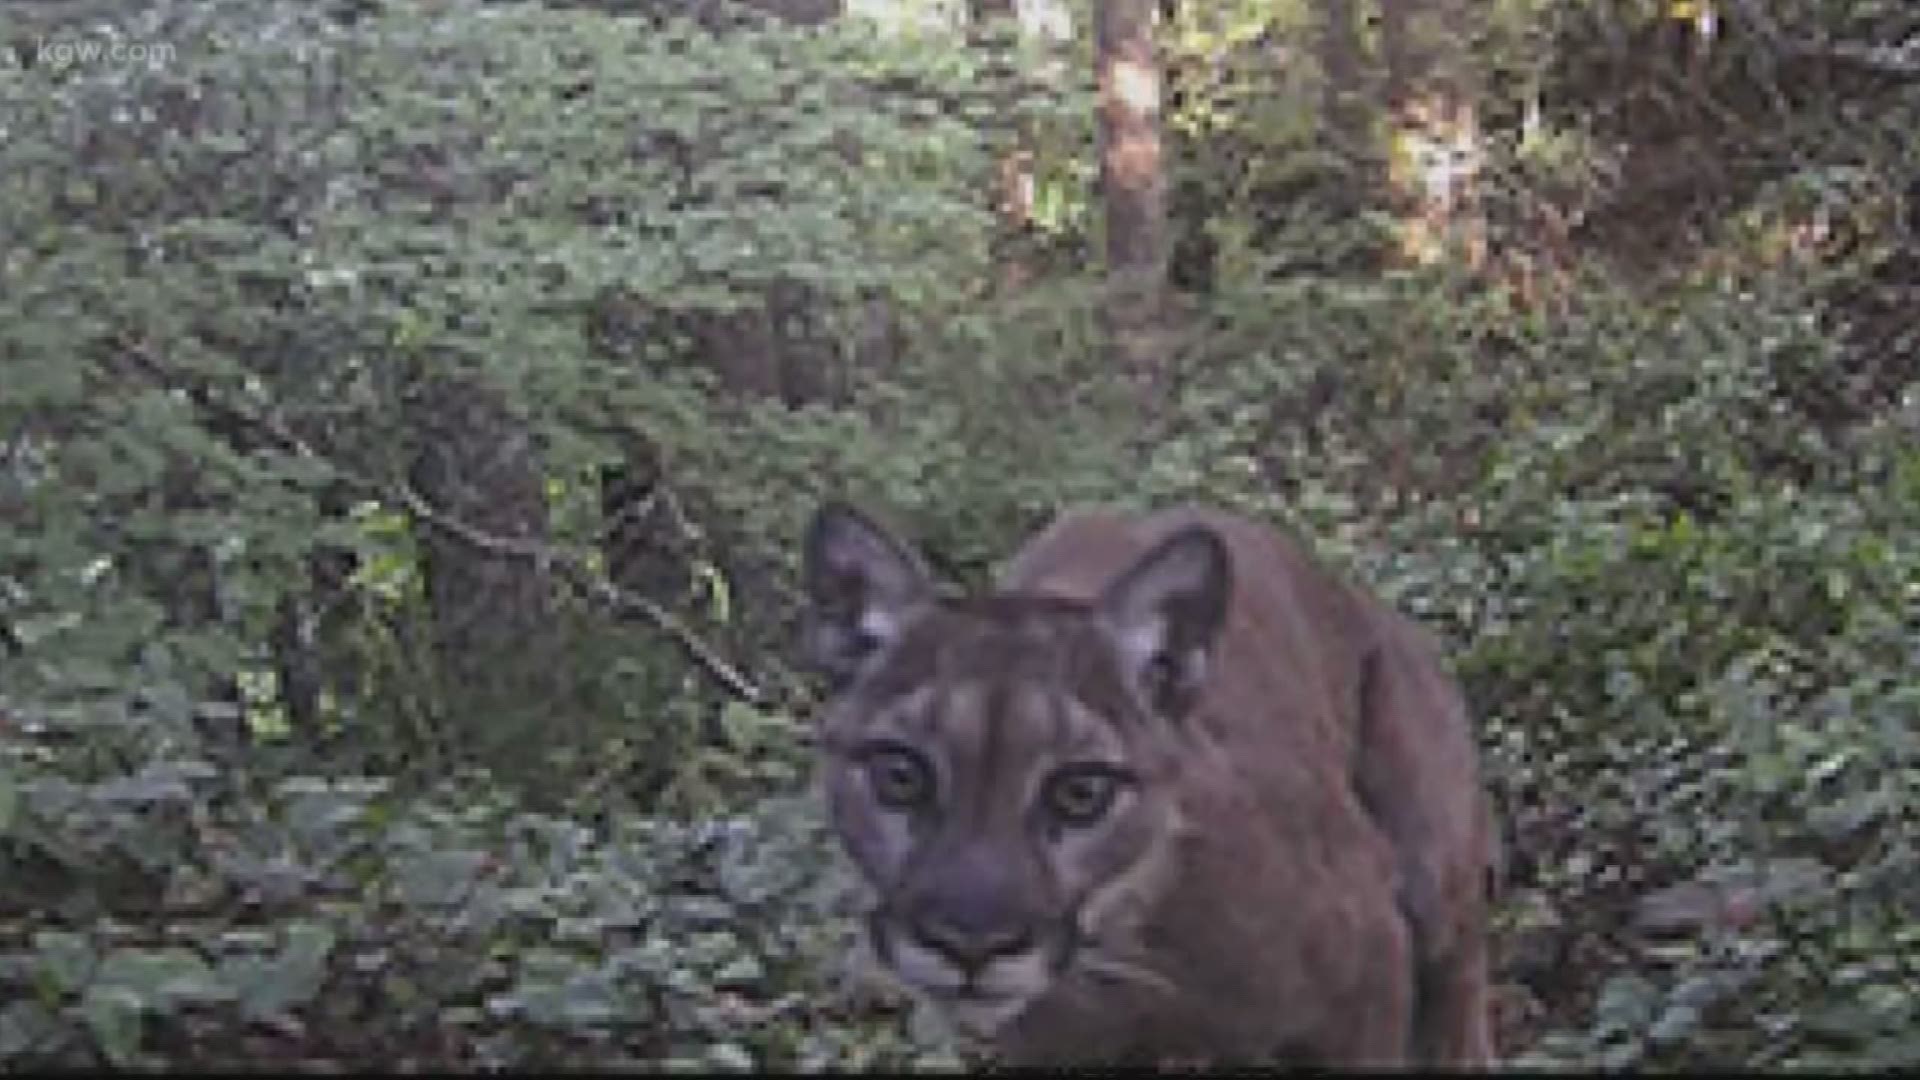 Oregon wildlife officials believe they killed the cougar that attacked and killed a Gresham hiker.